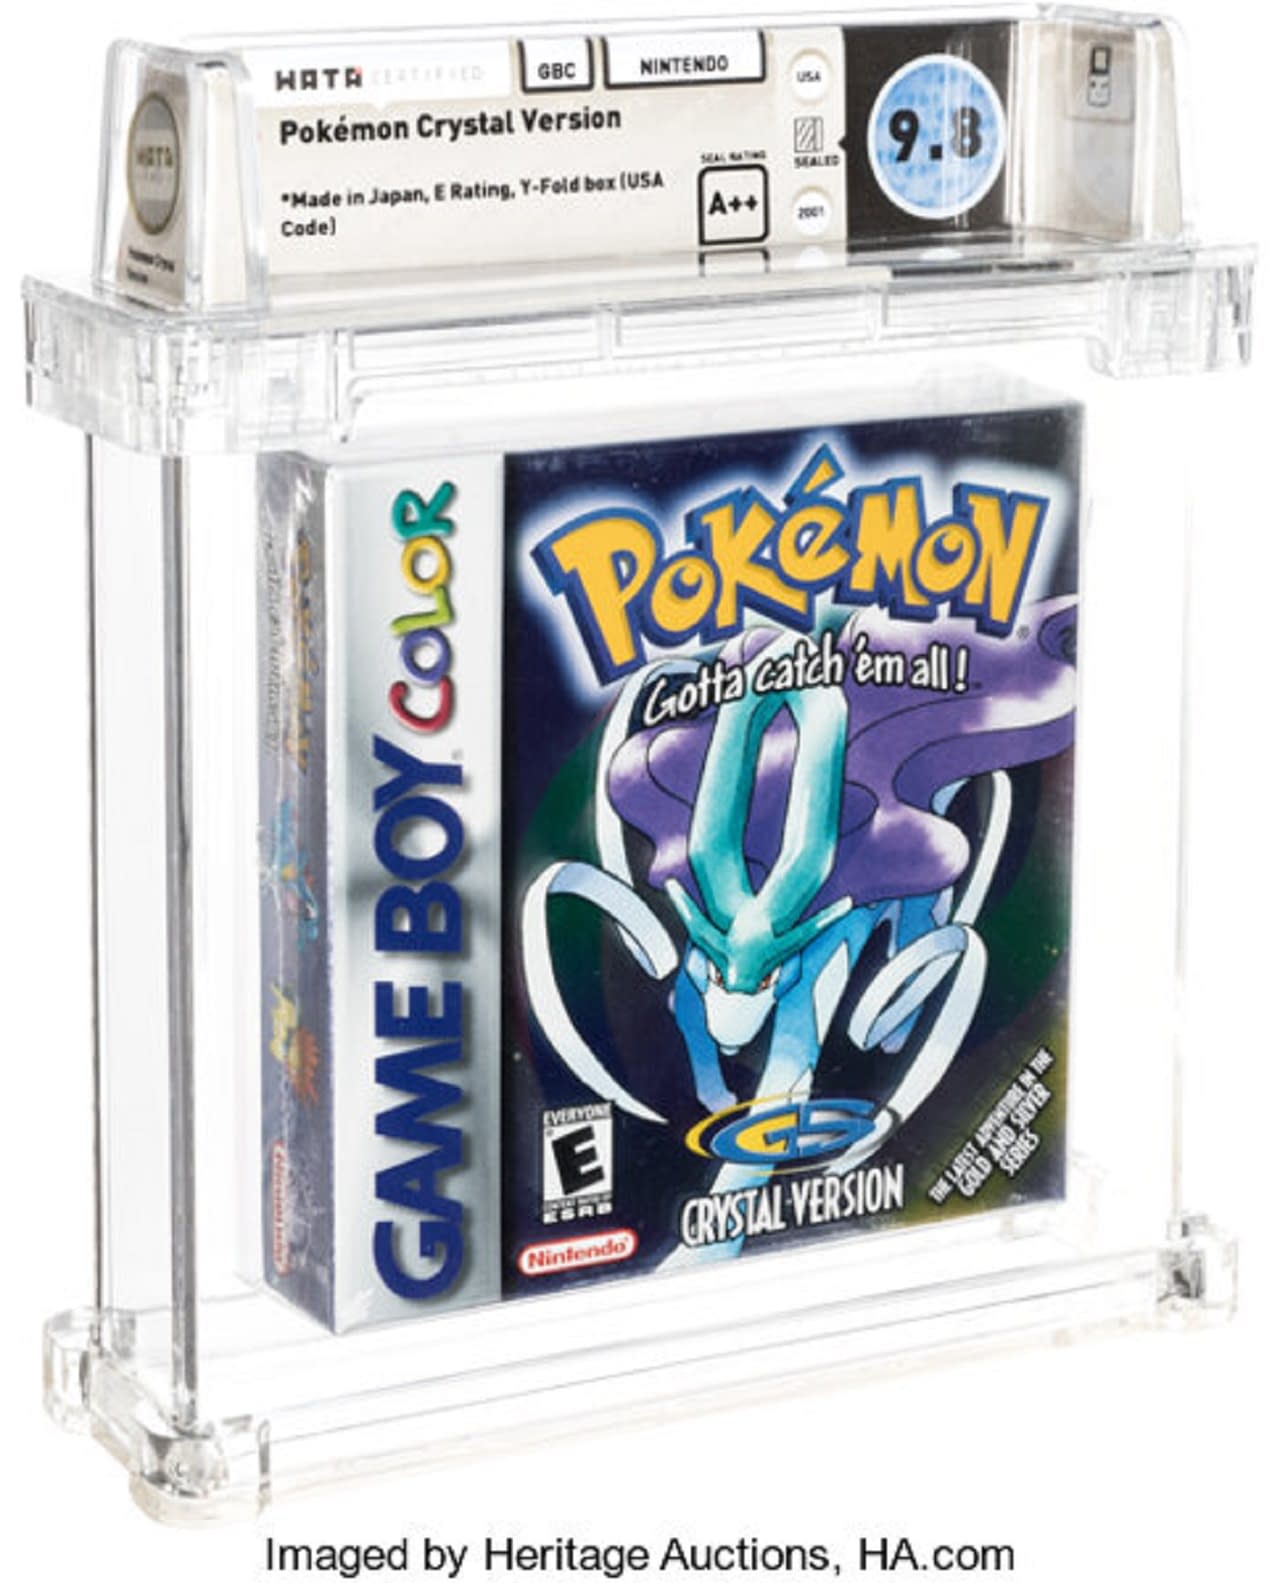 Pokémon Crystal Graded WATA 9.8 A++ Up For Auction At Heritage Now